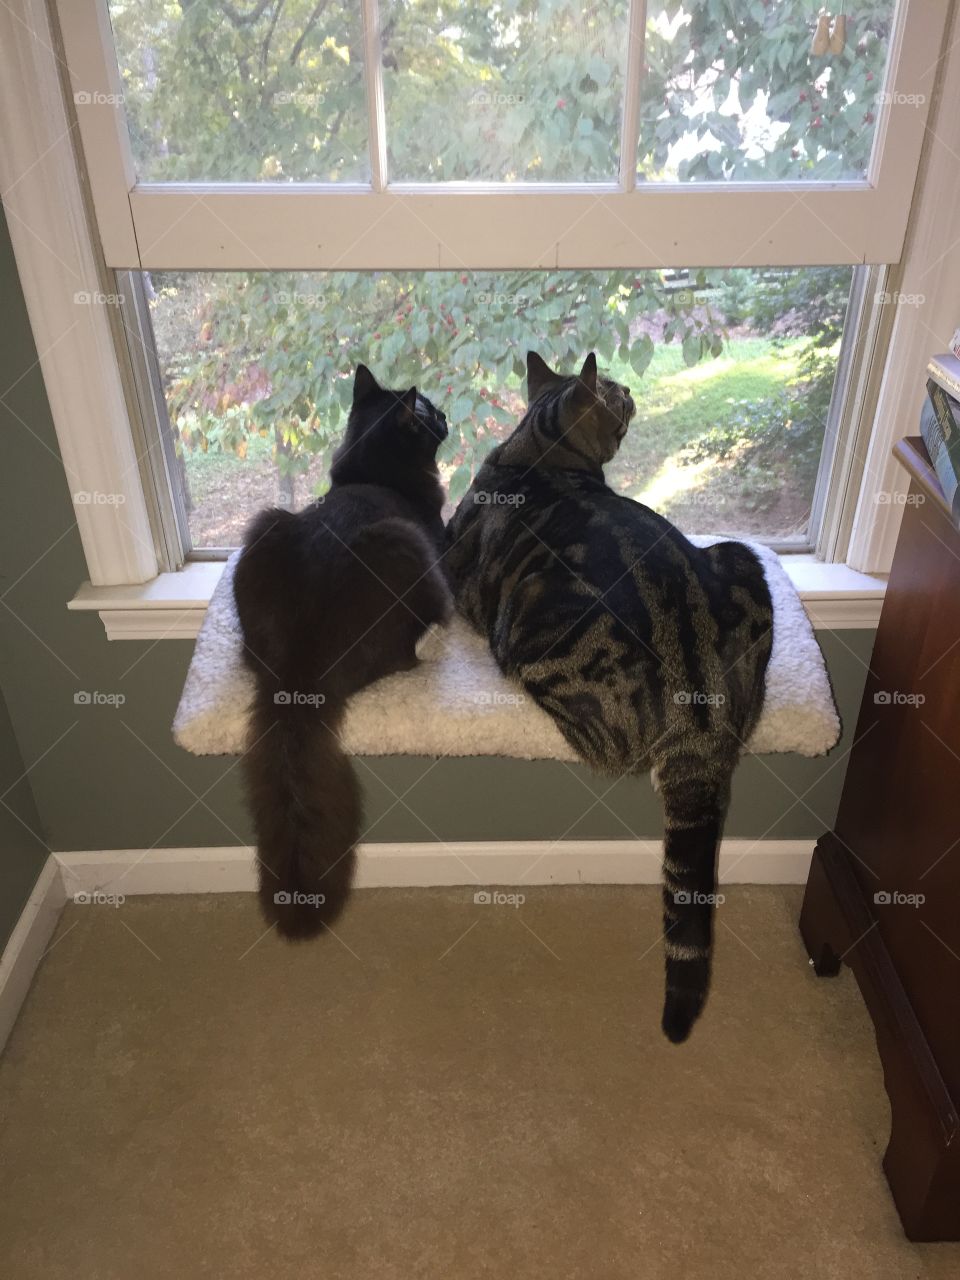 Two cats together